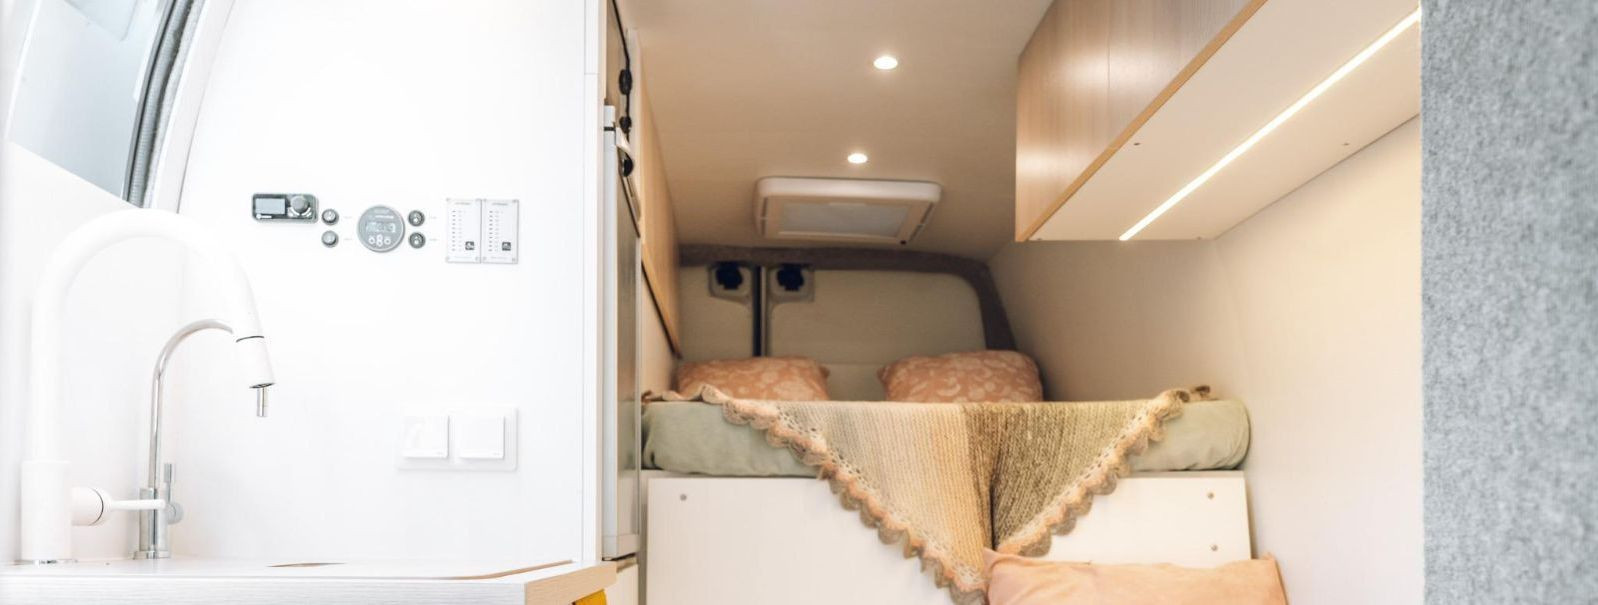 Embracing the van life means making the most out of every square inch. Efficient space utilization is not just a convenience; it's a necessity for comfort and f